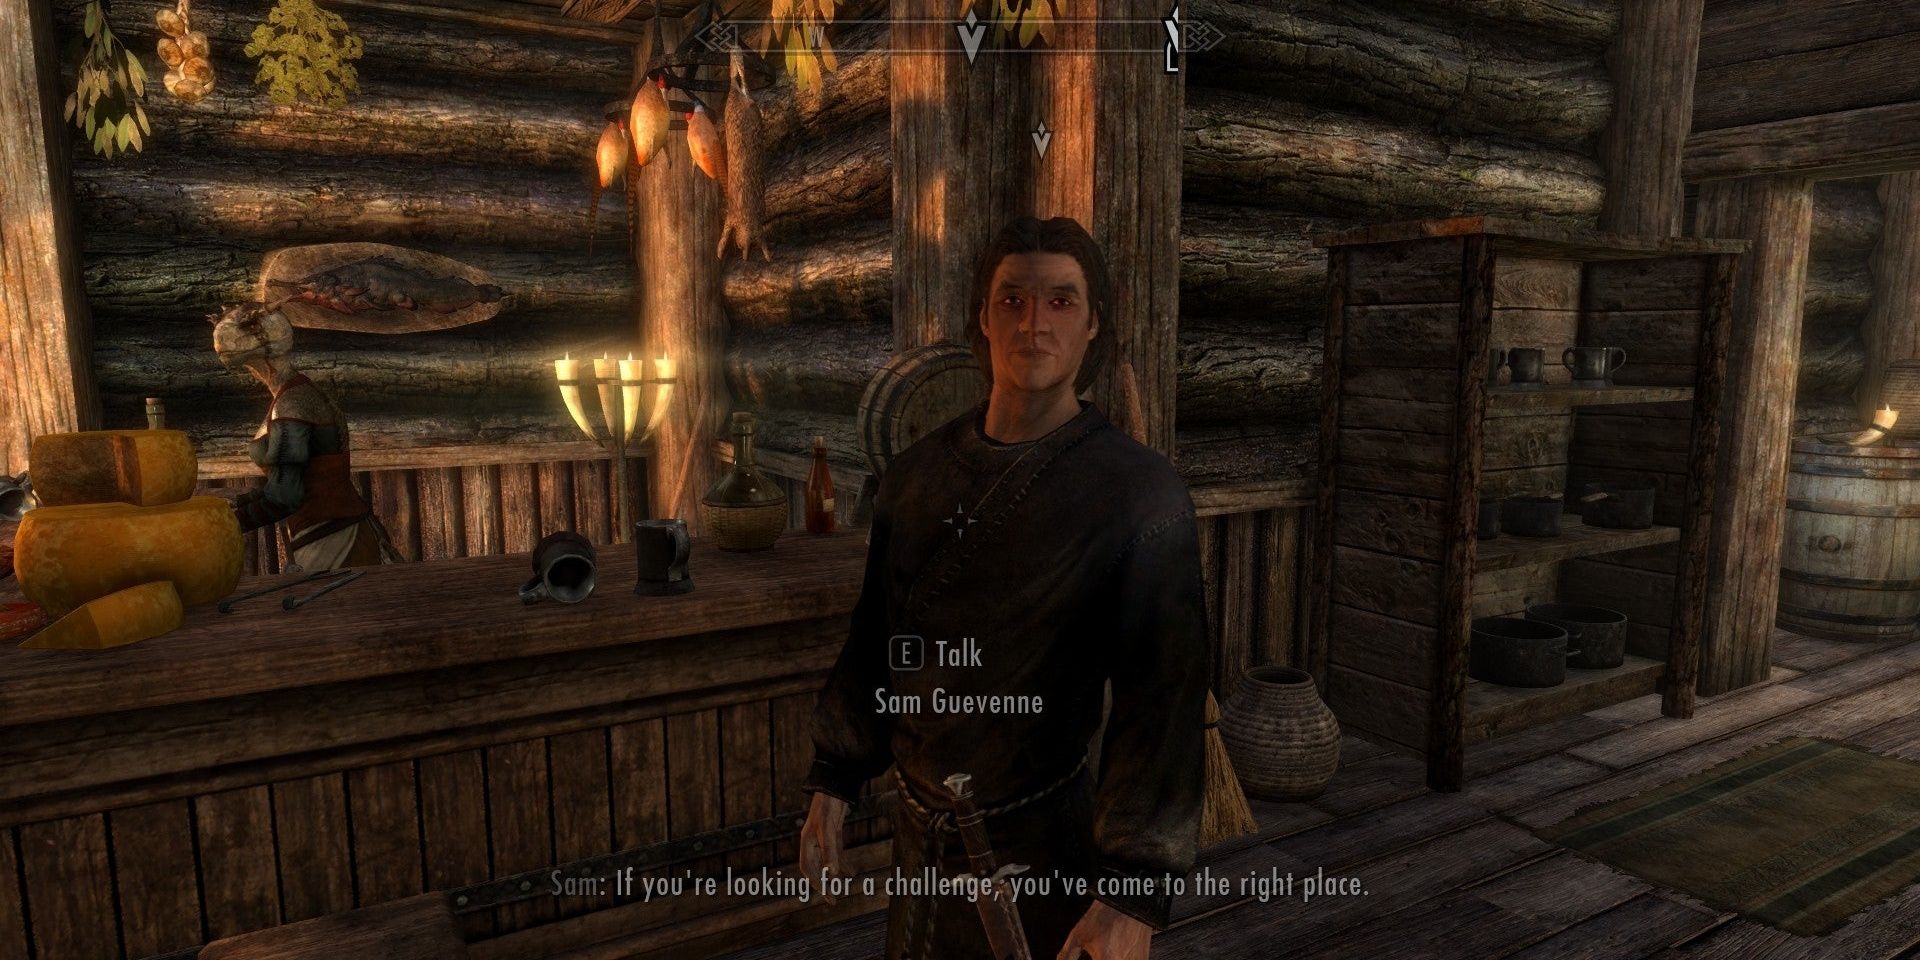 Sam Guevenne challenges the player to a drinking contest in Skyrim. 